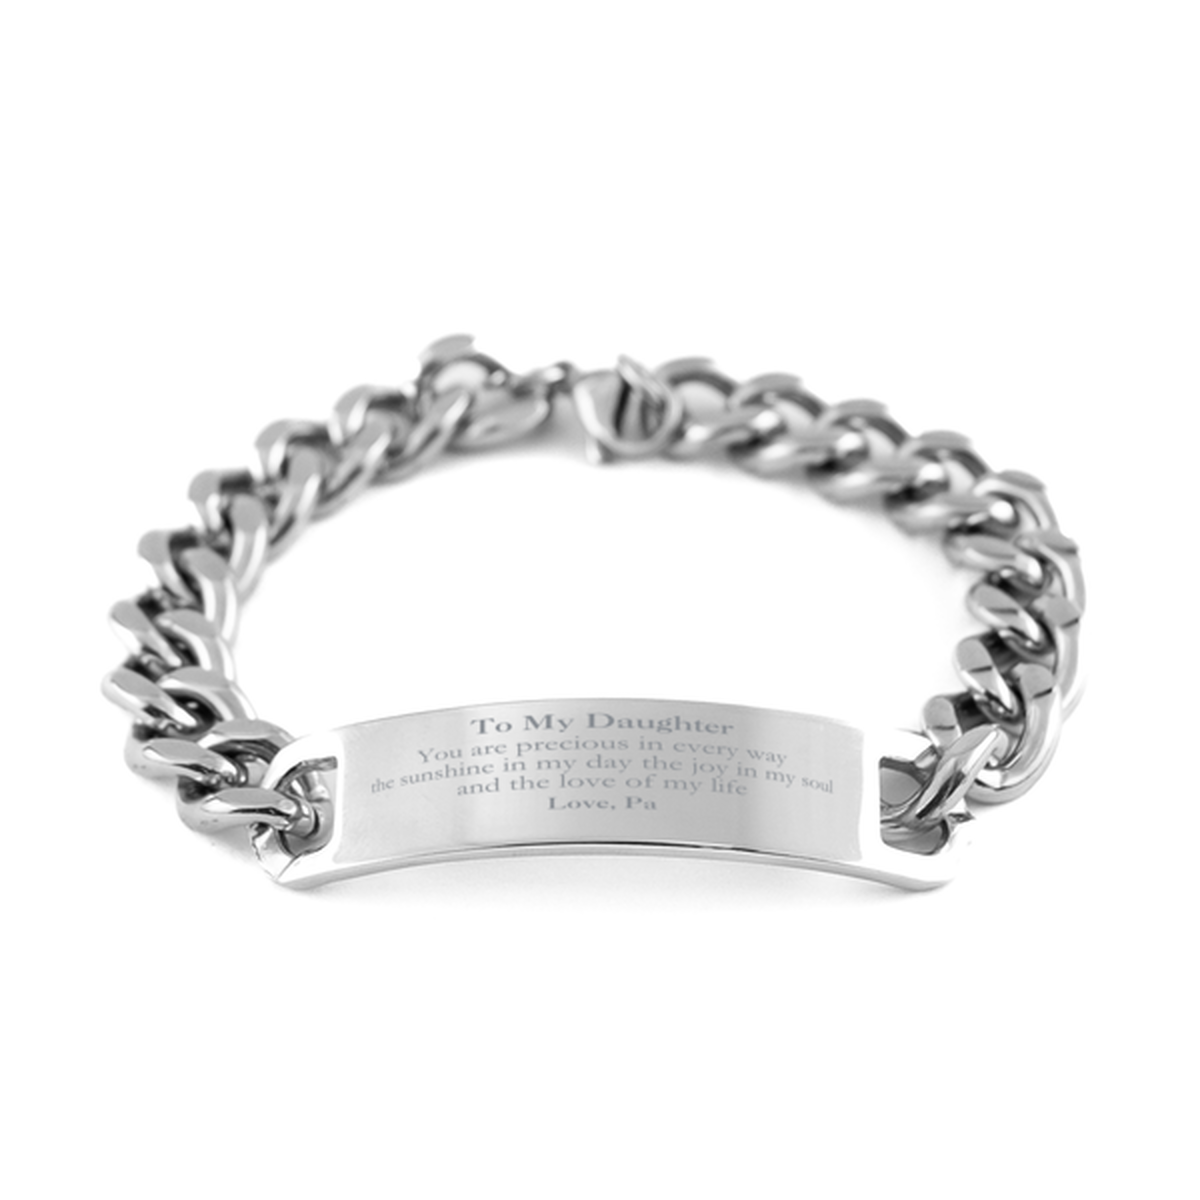 Graduation Gifts for Daughter Cuban Chain Stainless Steel Bracelet Present from Pa, Christmas Daughter Birthday Gifts Daughter You are precious in every way the sunshine in my day. Love, Pa